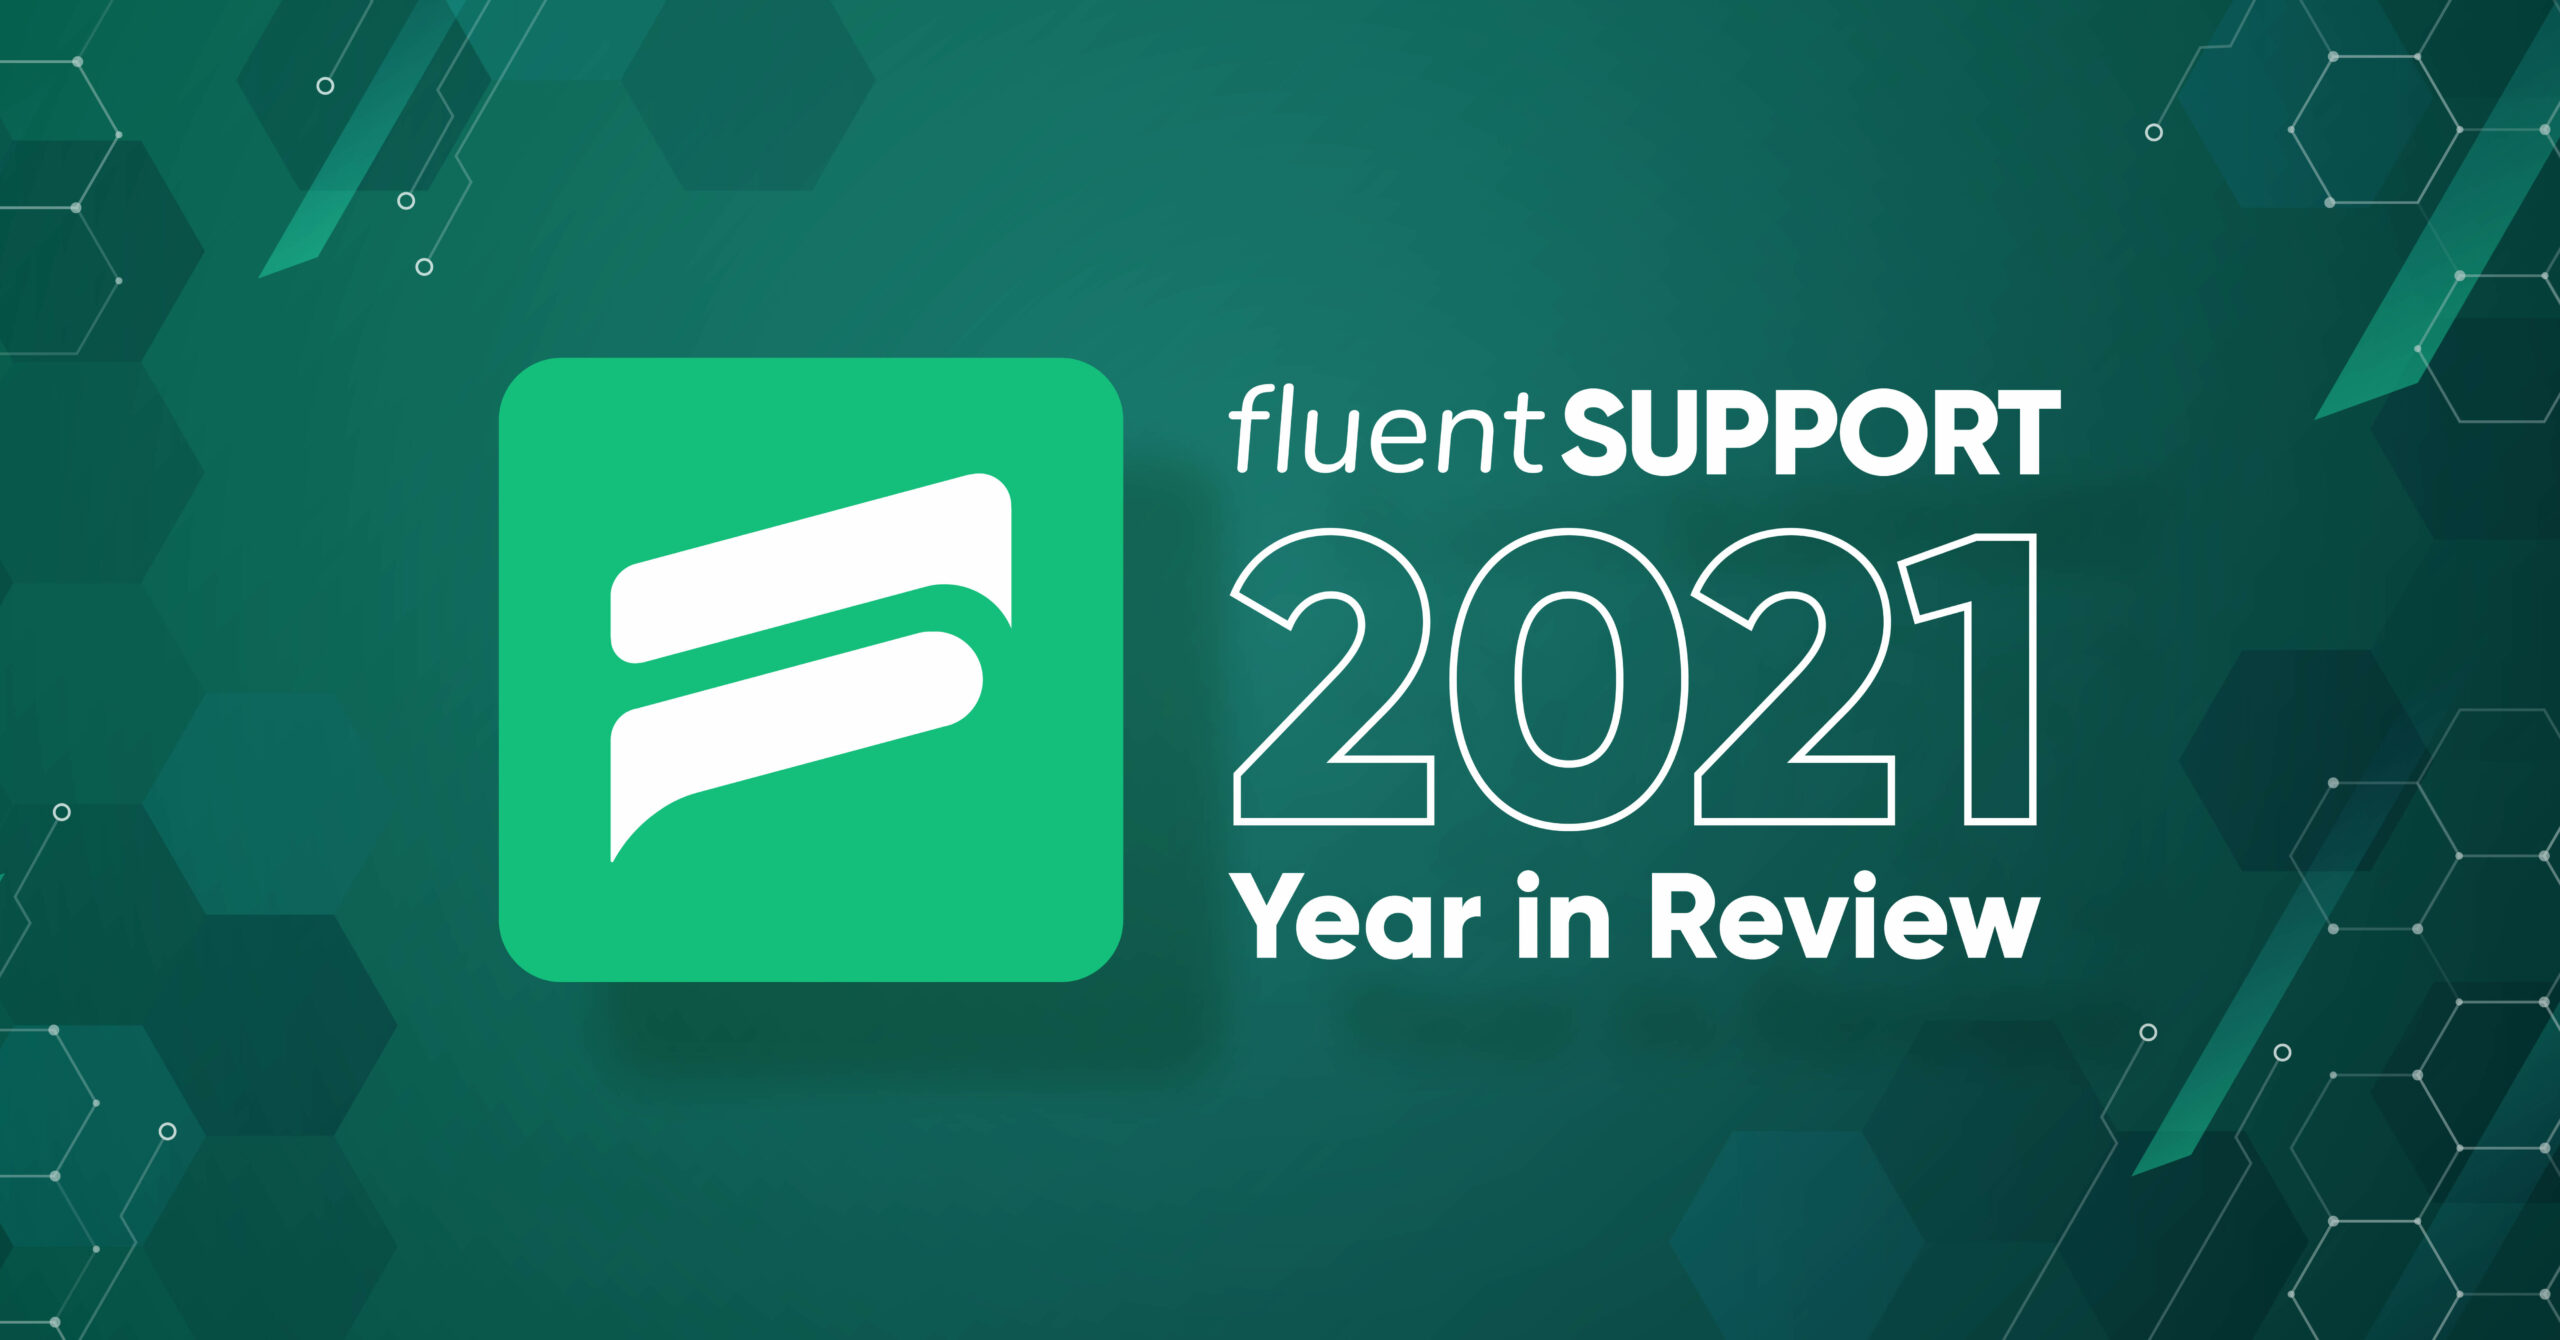 Fluent Support year in review 2021